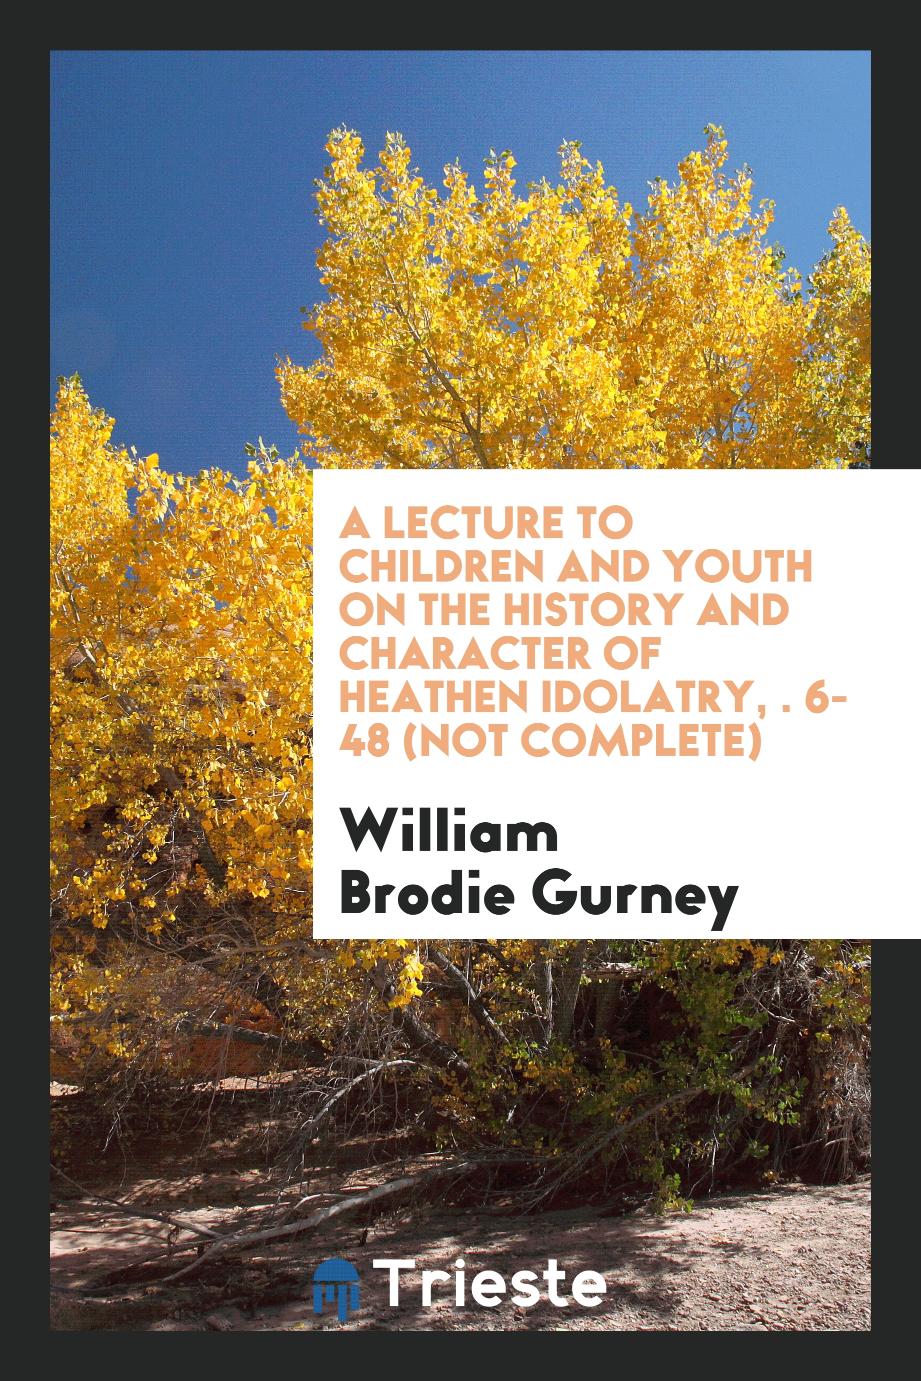 A lecture to children and youth on the history and character of heathen idolatry, рр. 6-48 (not complete)